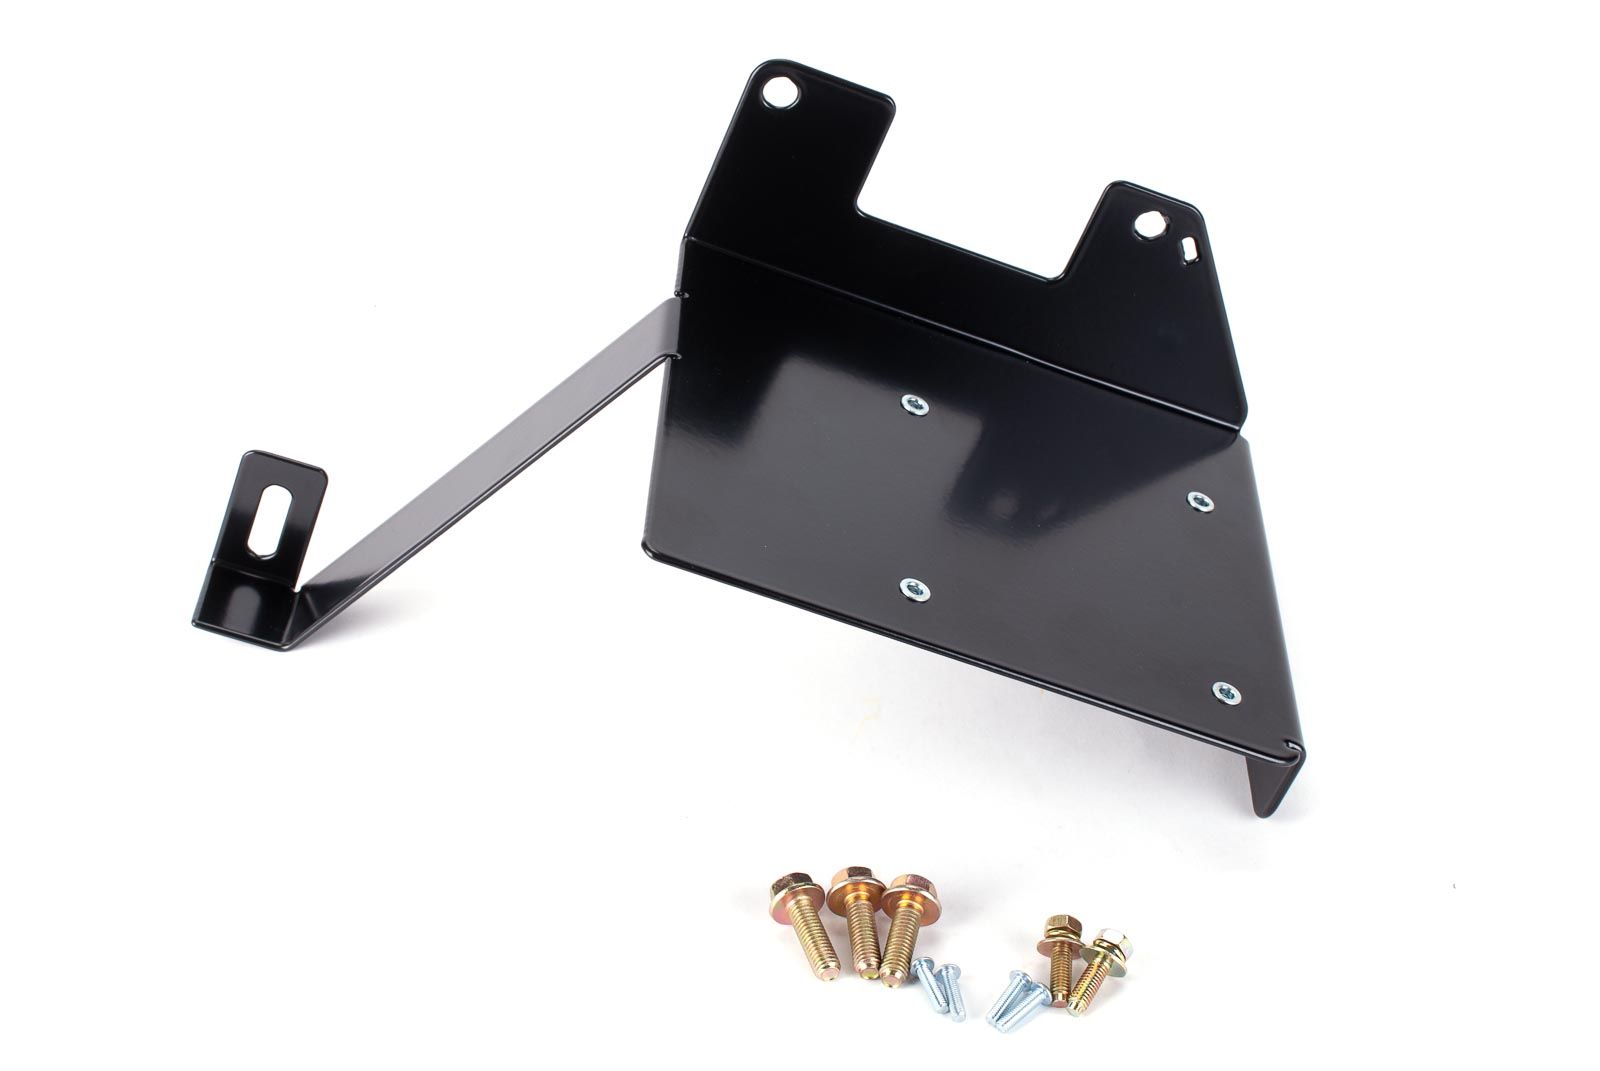 Mount for Intervolt DCCPRO DC-DC charger  to suit Hilux GGUN/N80/Revo/Rocco